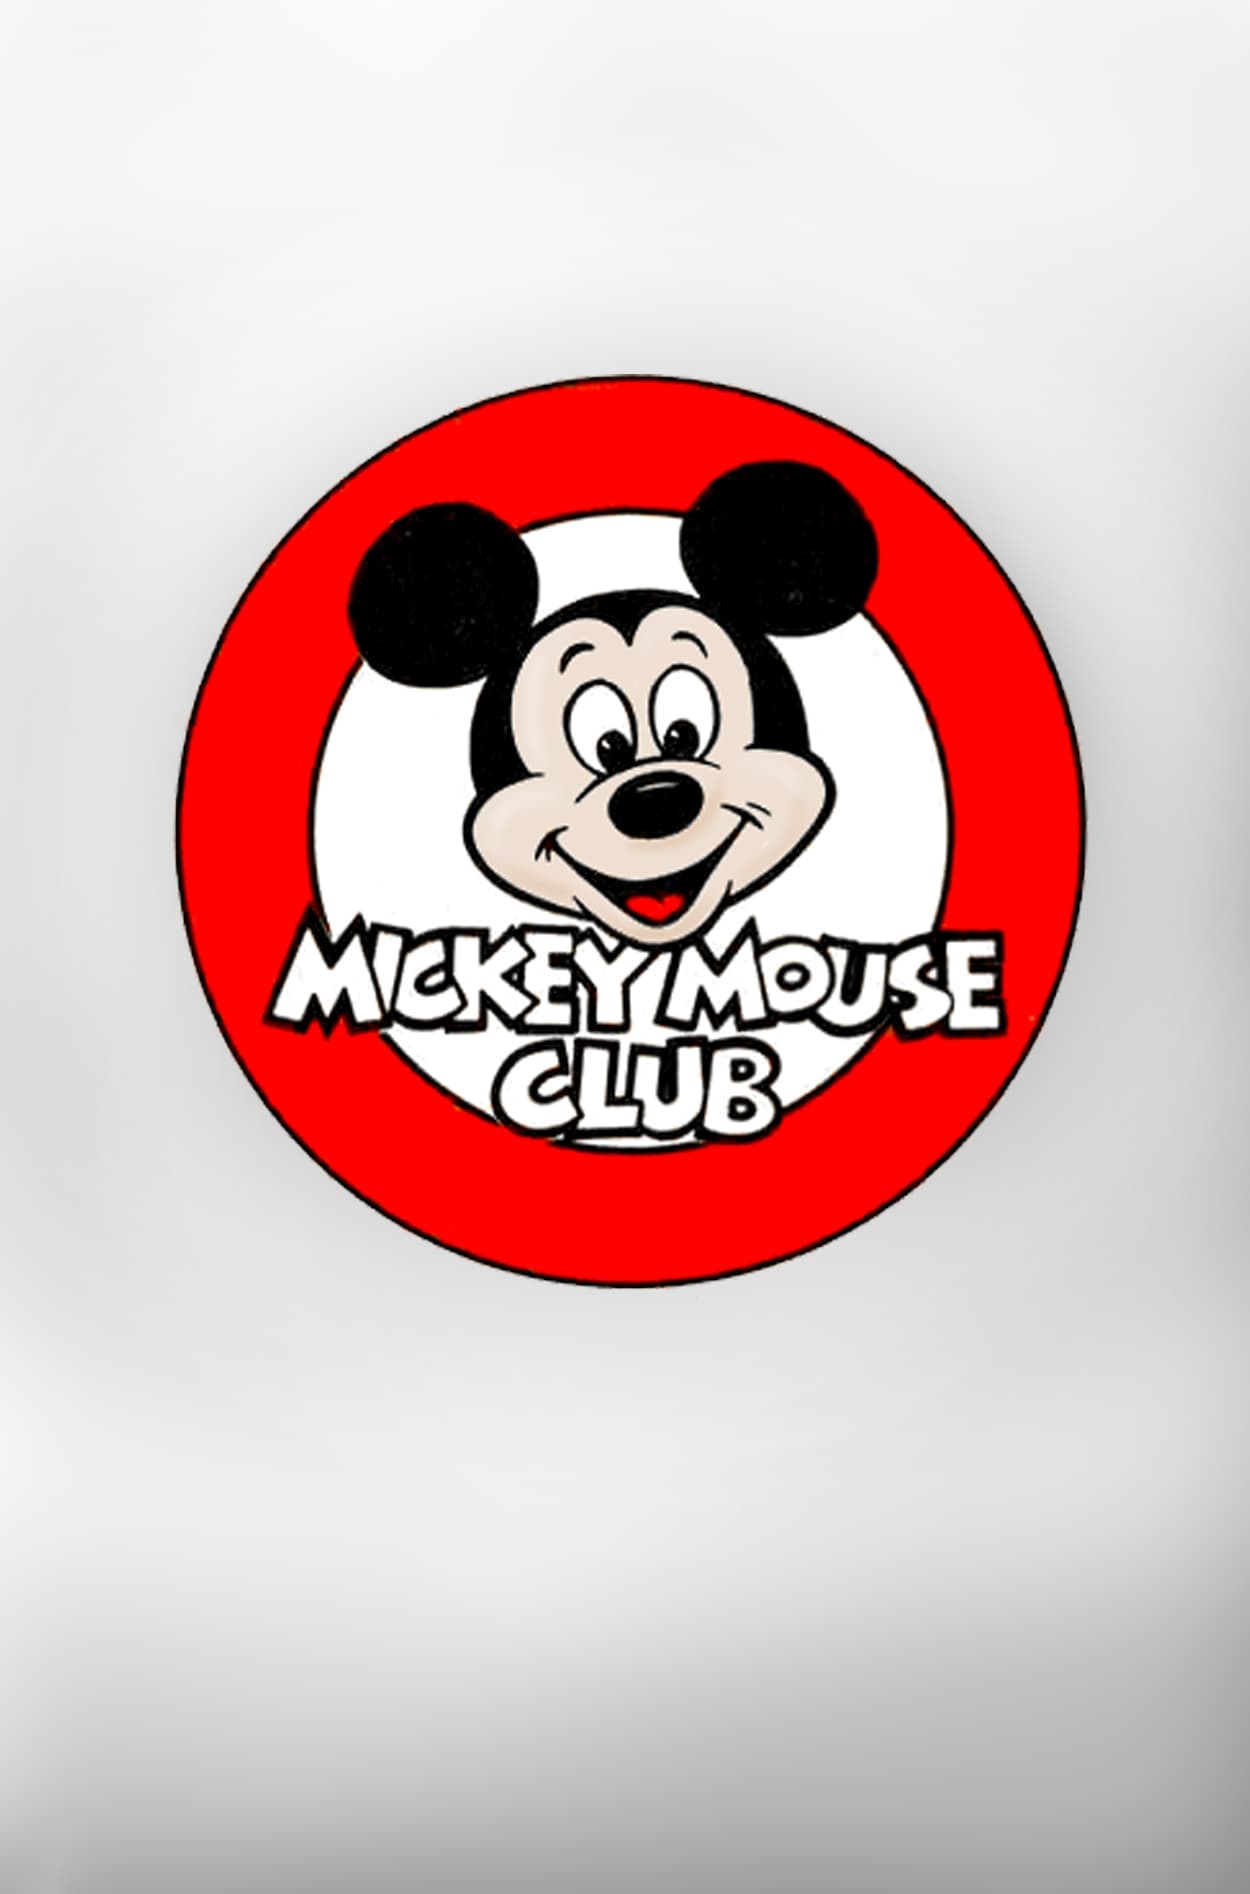 The New Mickey Mouse Club